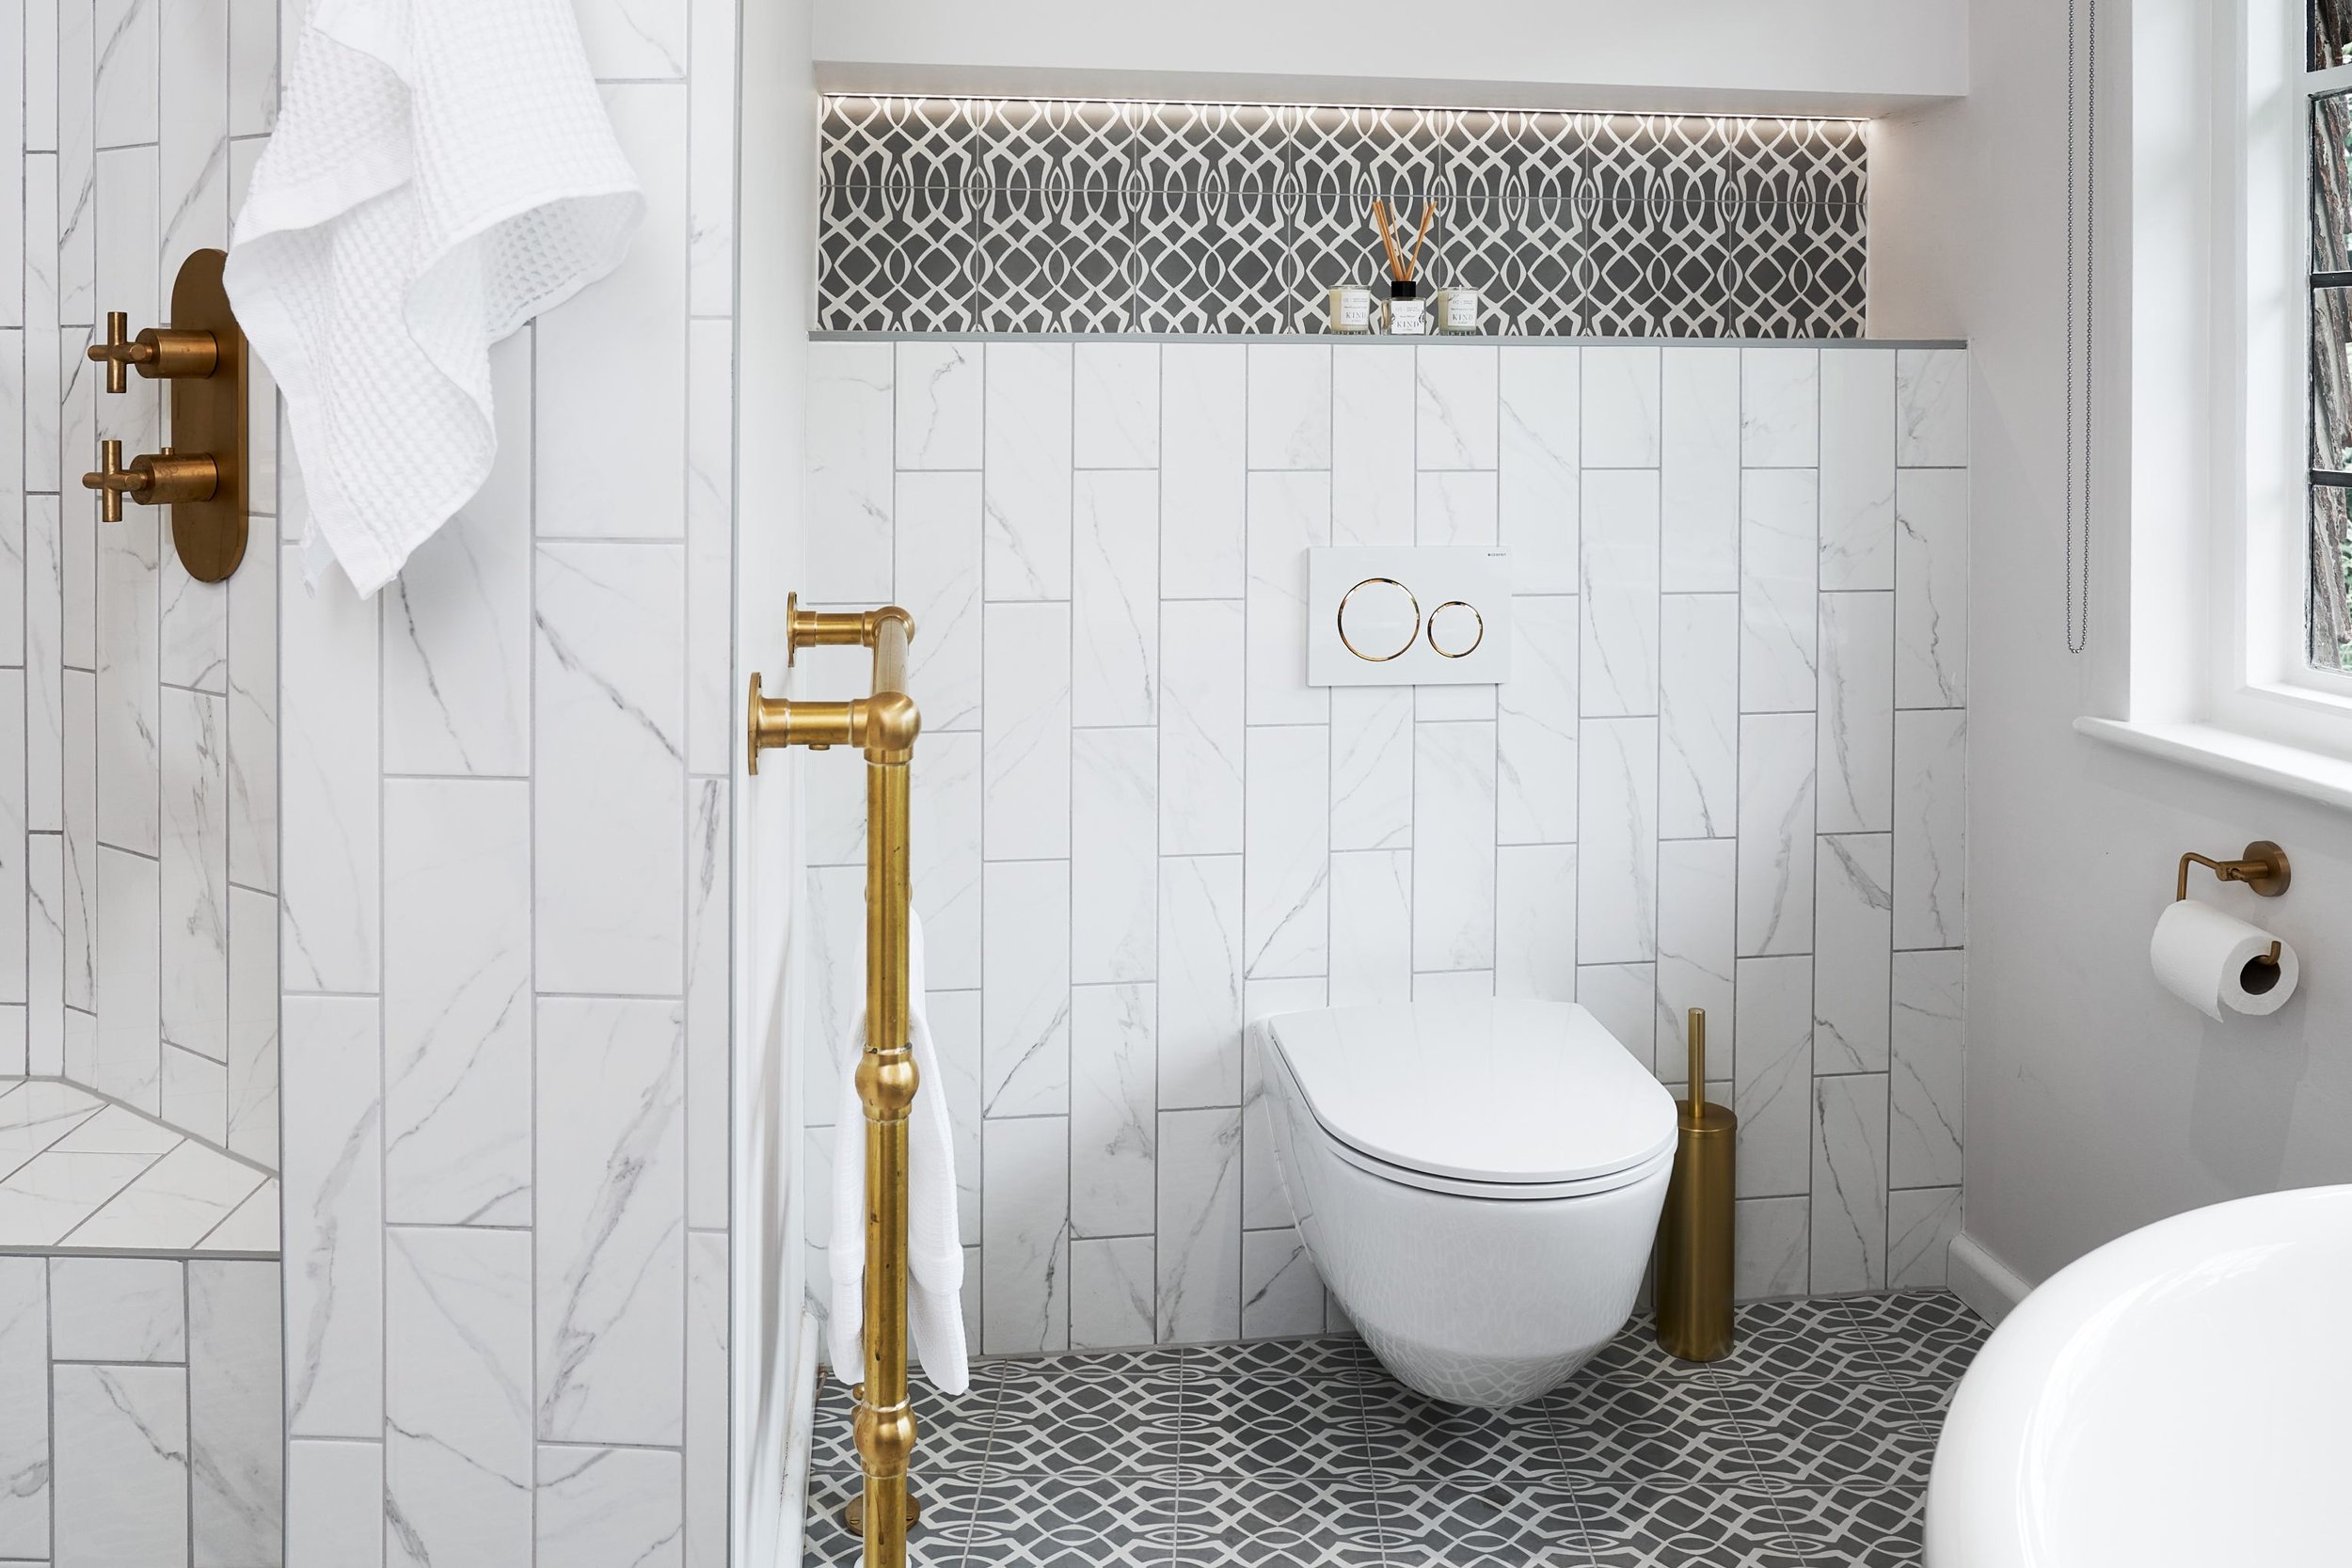 wall-hung-wc-with-mixed-tiles-and-gold-brassware.jpg